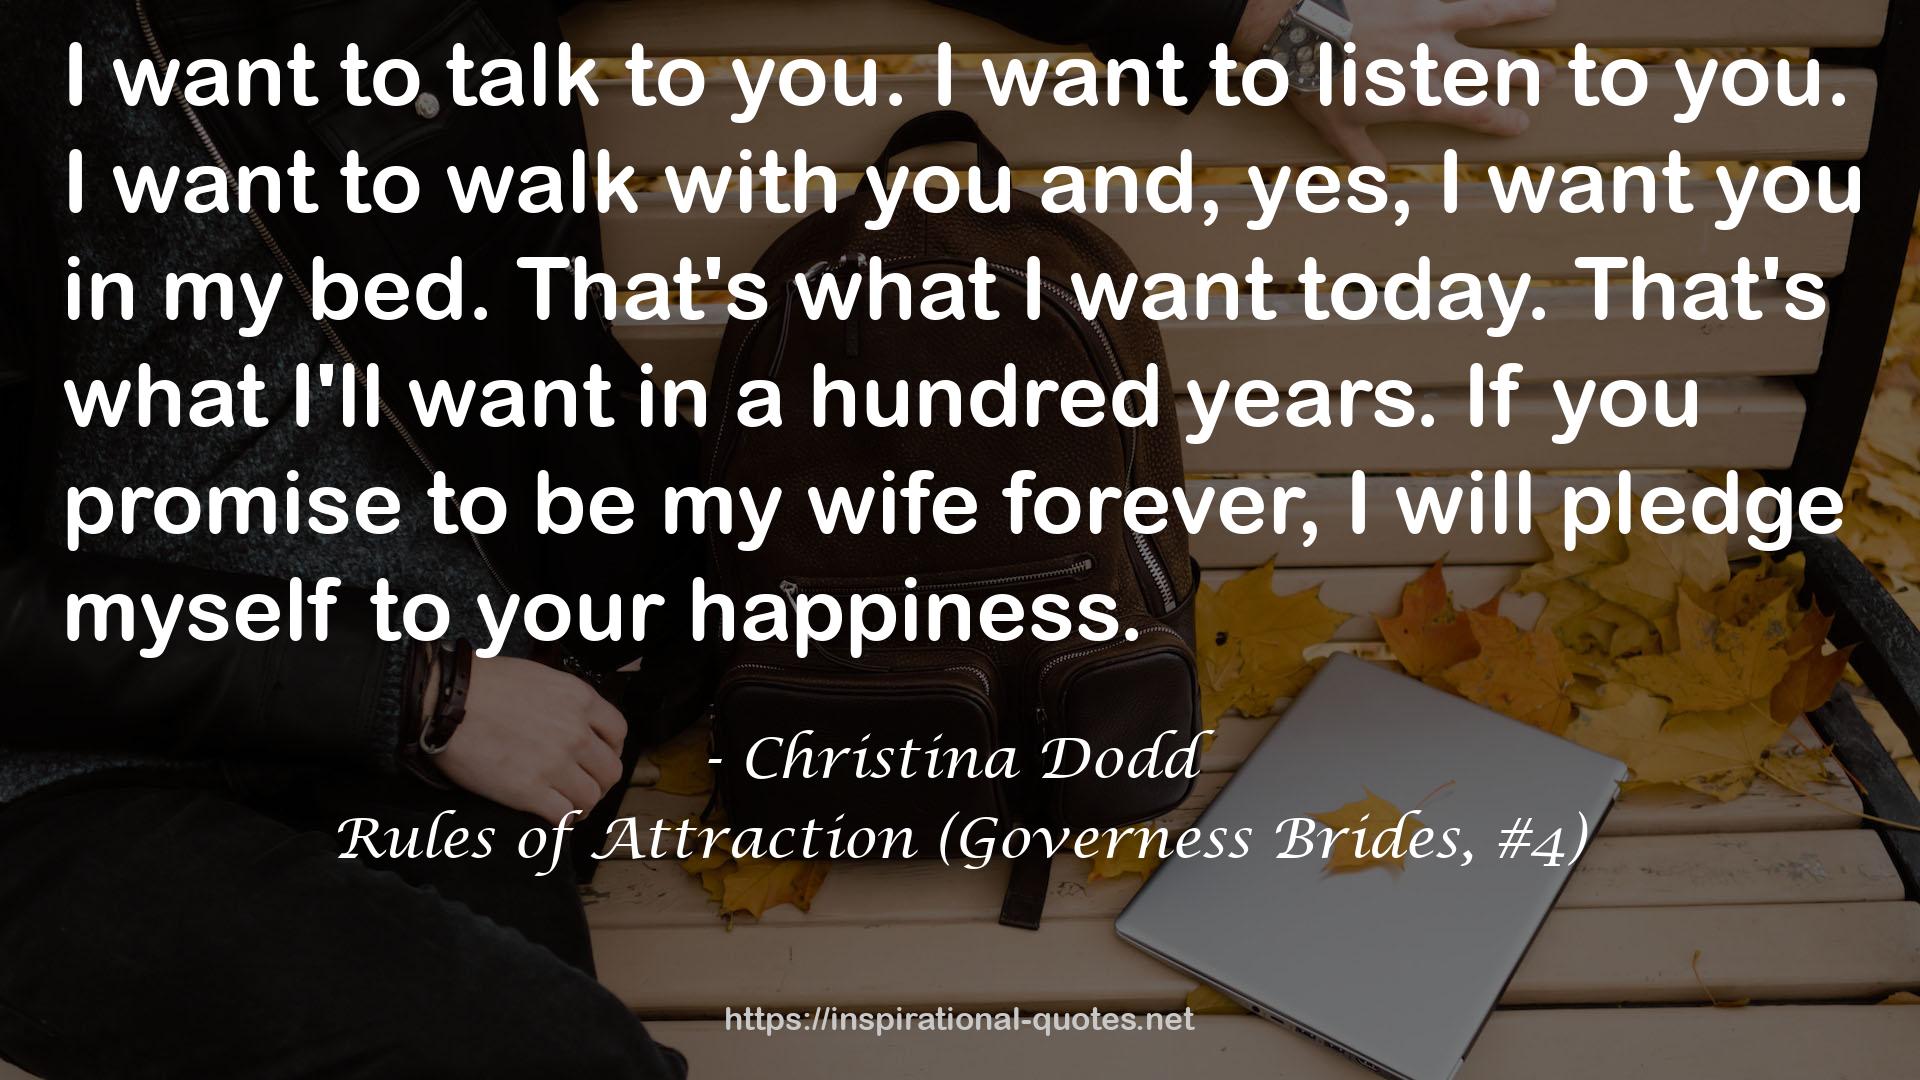 Rules of Attraction (Governess Brides, #4) QUOTES